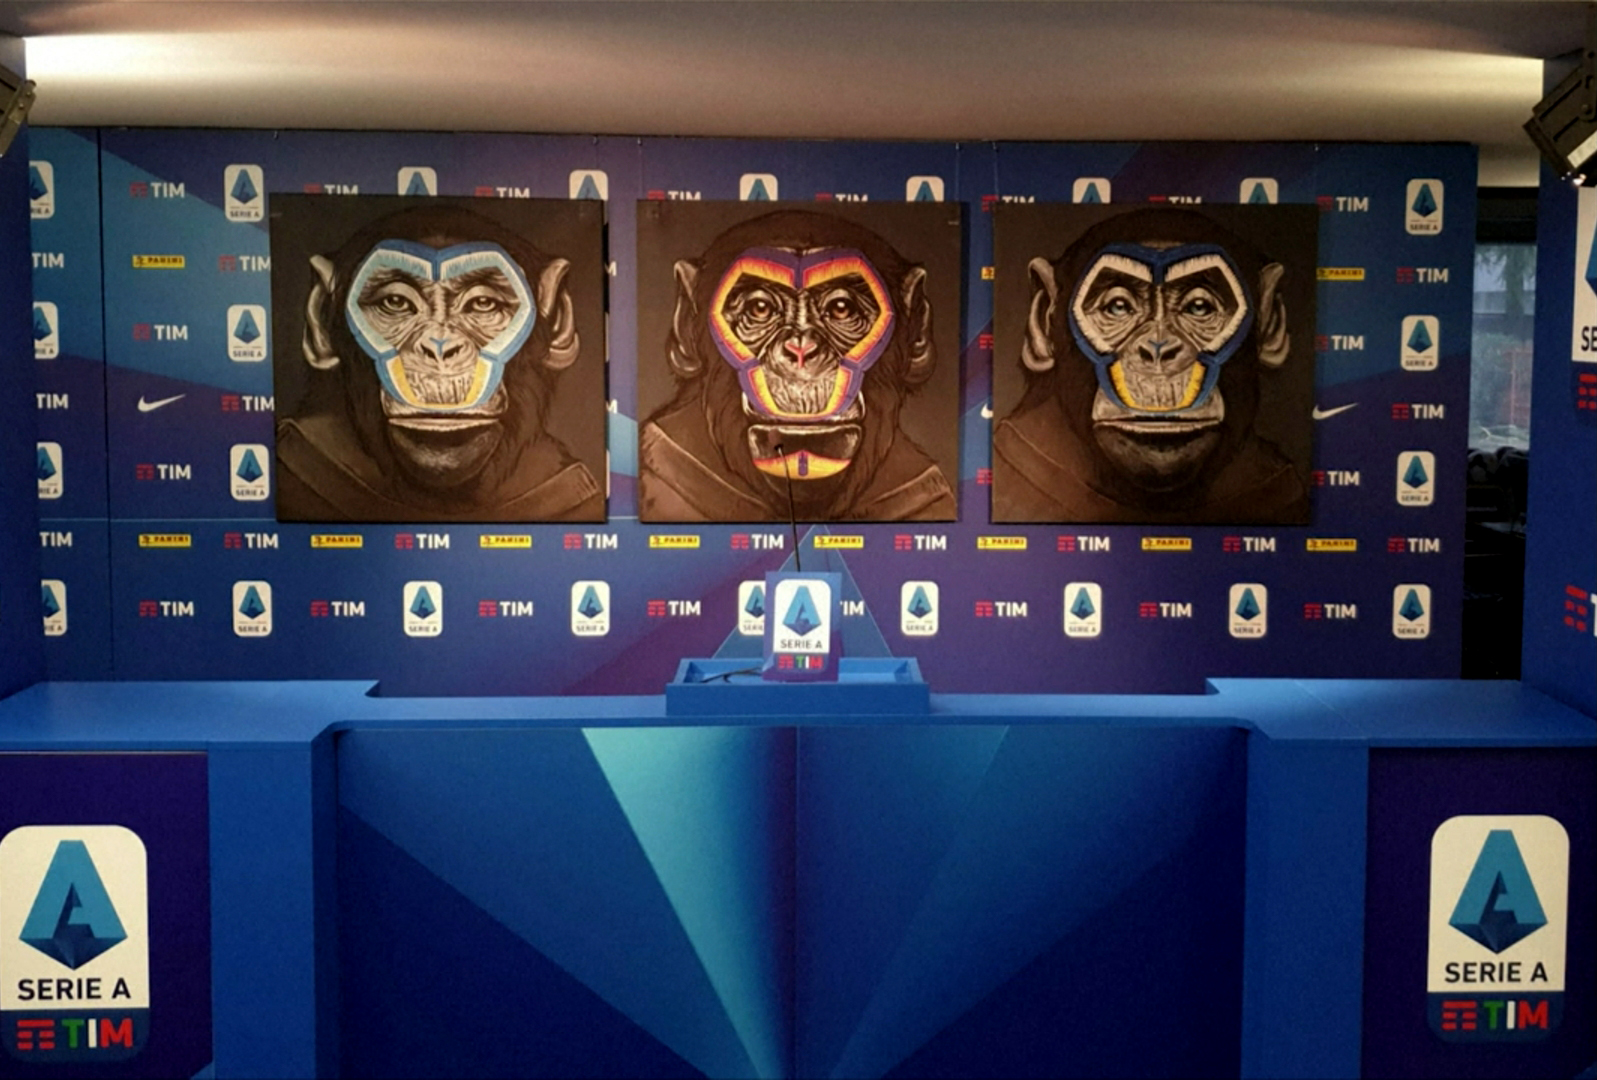 PHOTO: A poster by artist Simone Fugazzotto done as part of Serie A's campaign against racism features images of three monkeys.